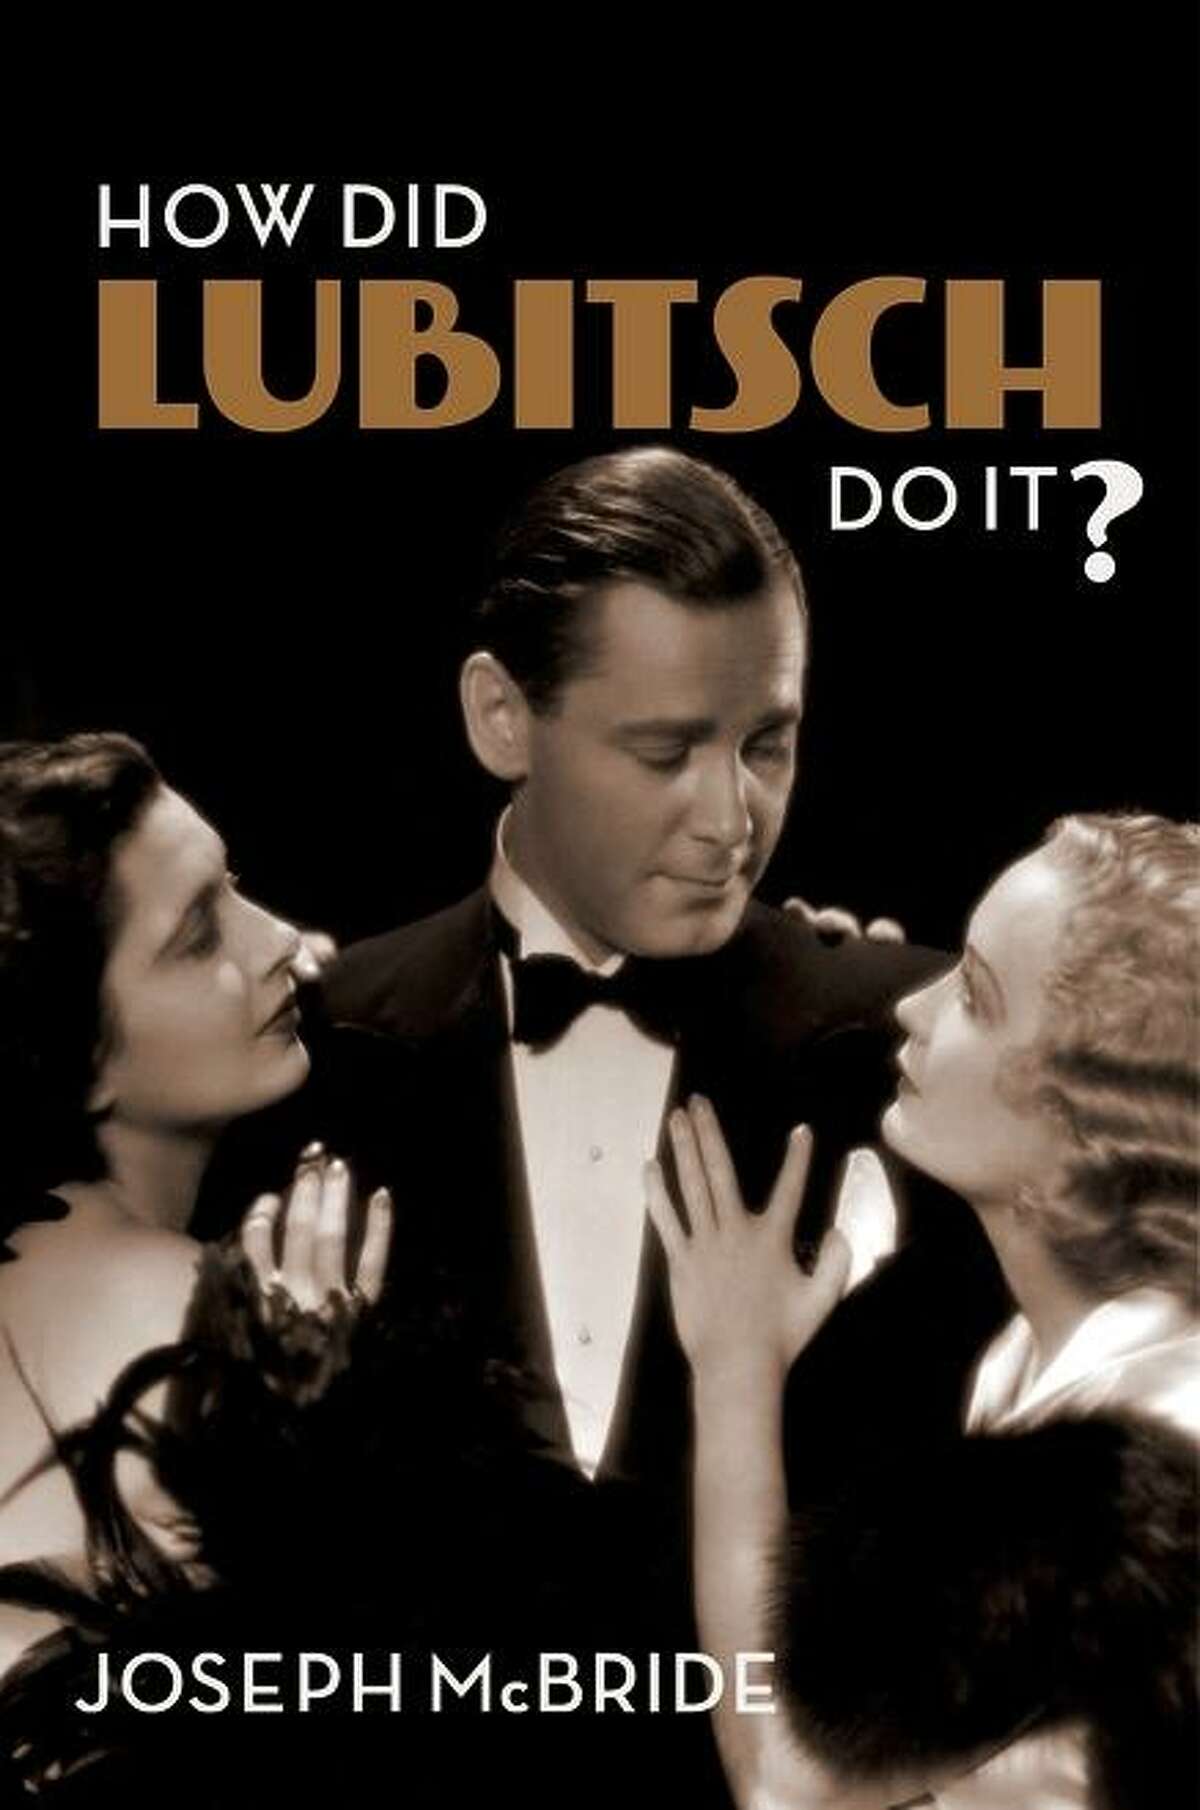 “How Did Lubitsch Do It?”